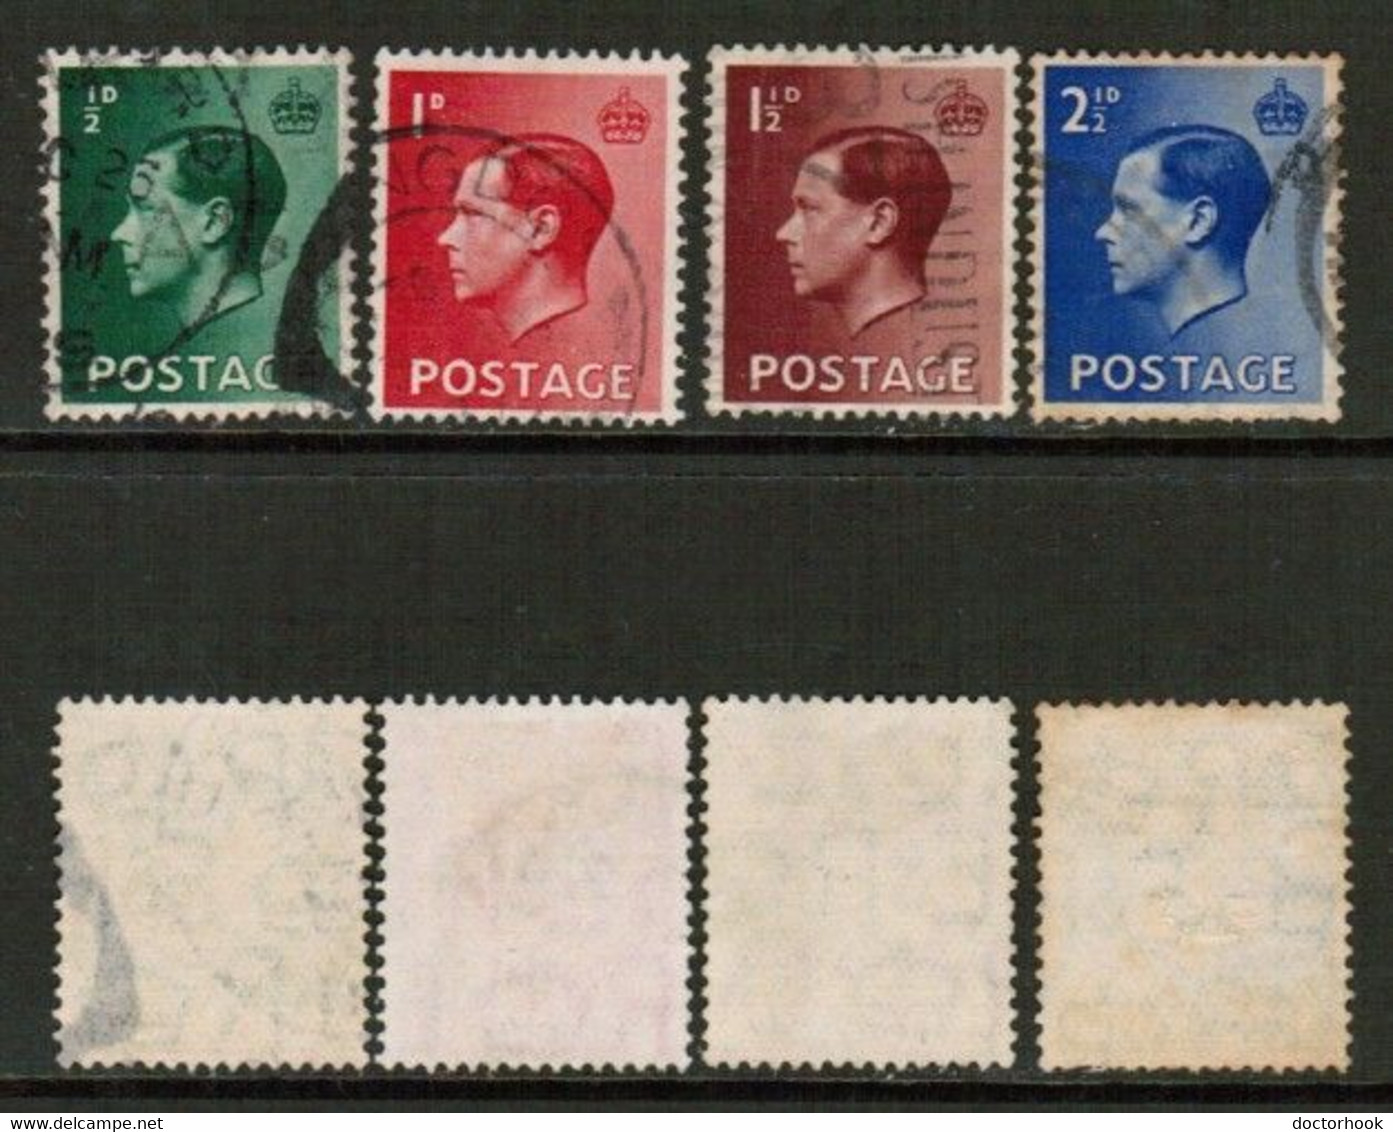 GREAT BRITAIN   Scott # 230-3 USED (CONDITION AS PER SCAN) (Stamp Scan # 832-8) - Used Stamps